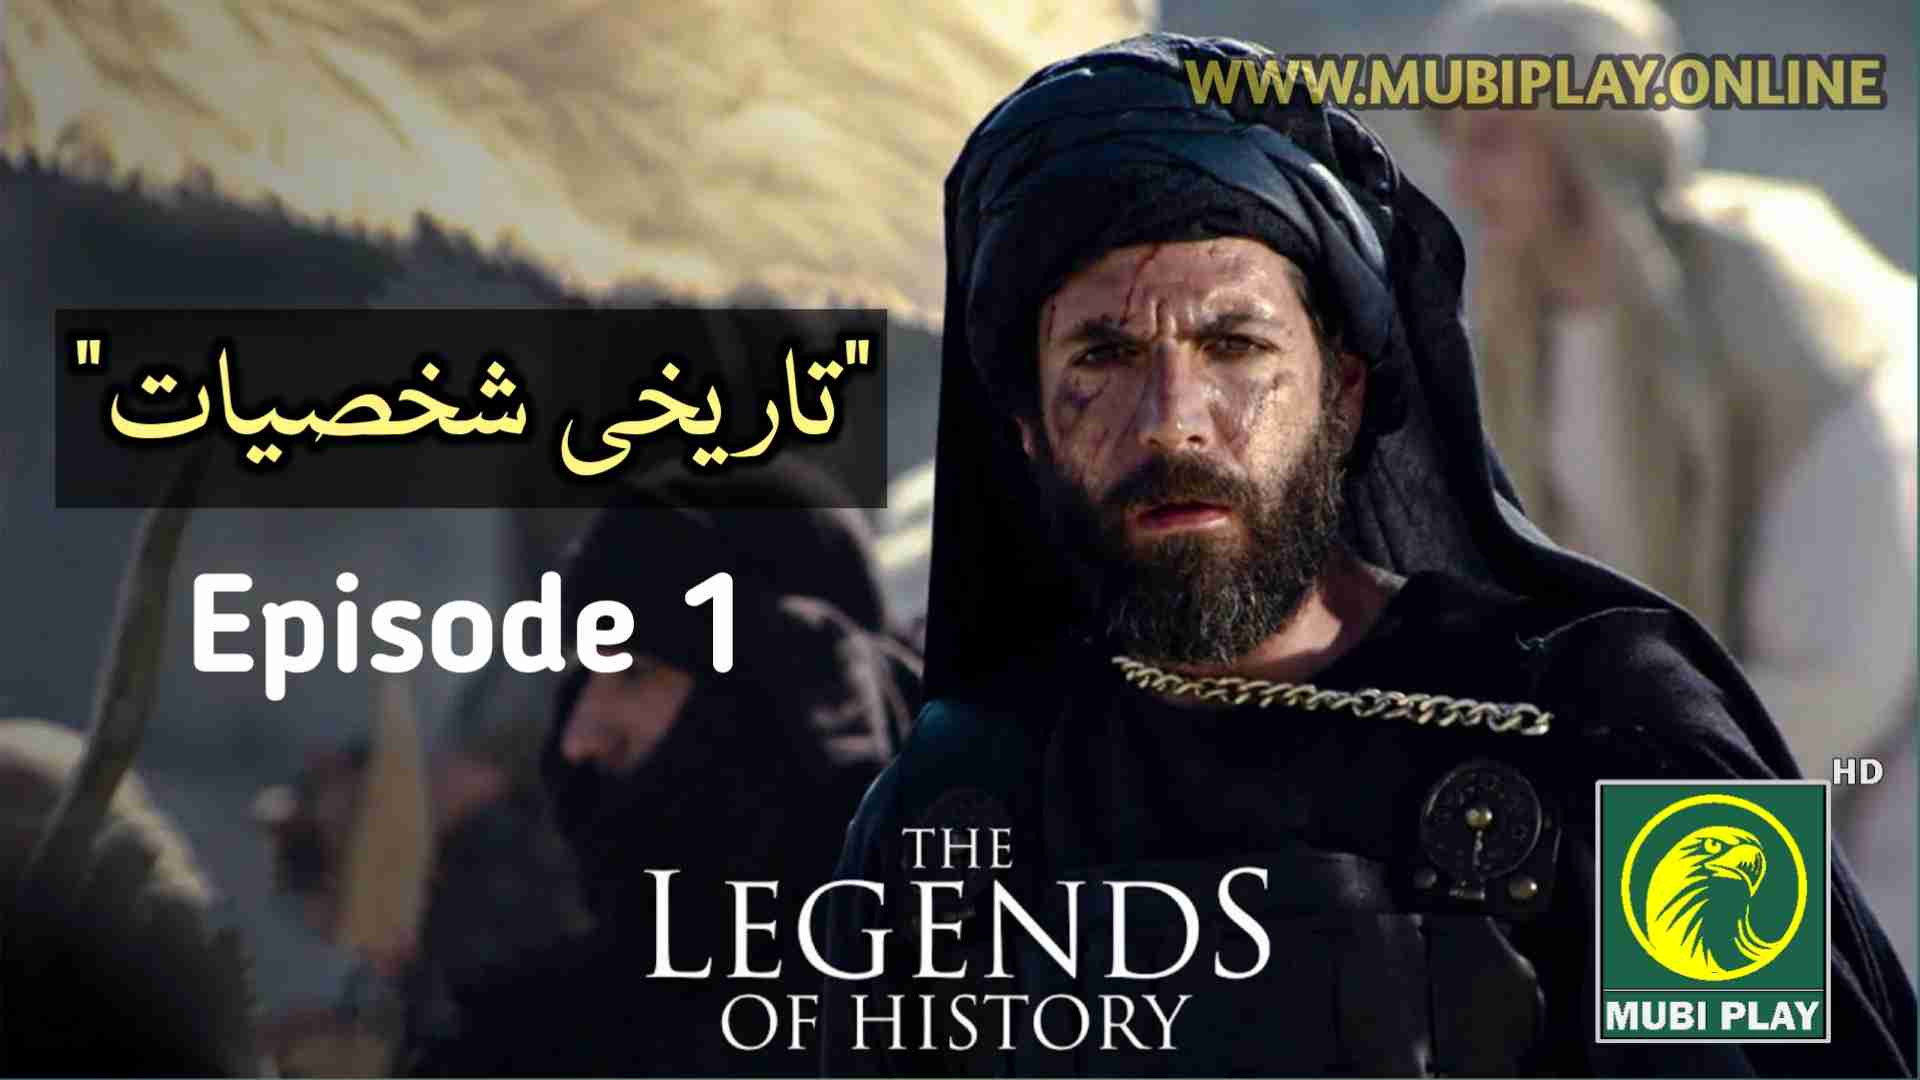 Legends of History Episode 1 with Urdu Subtitles by MubiPlay